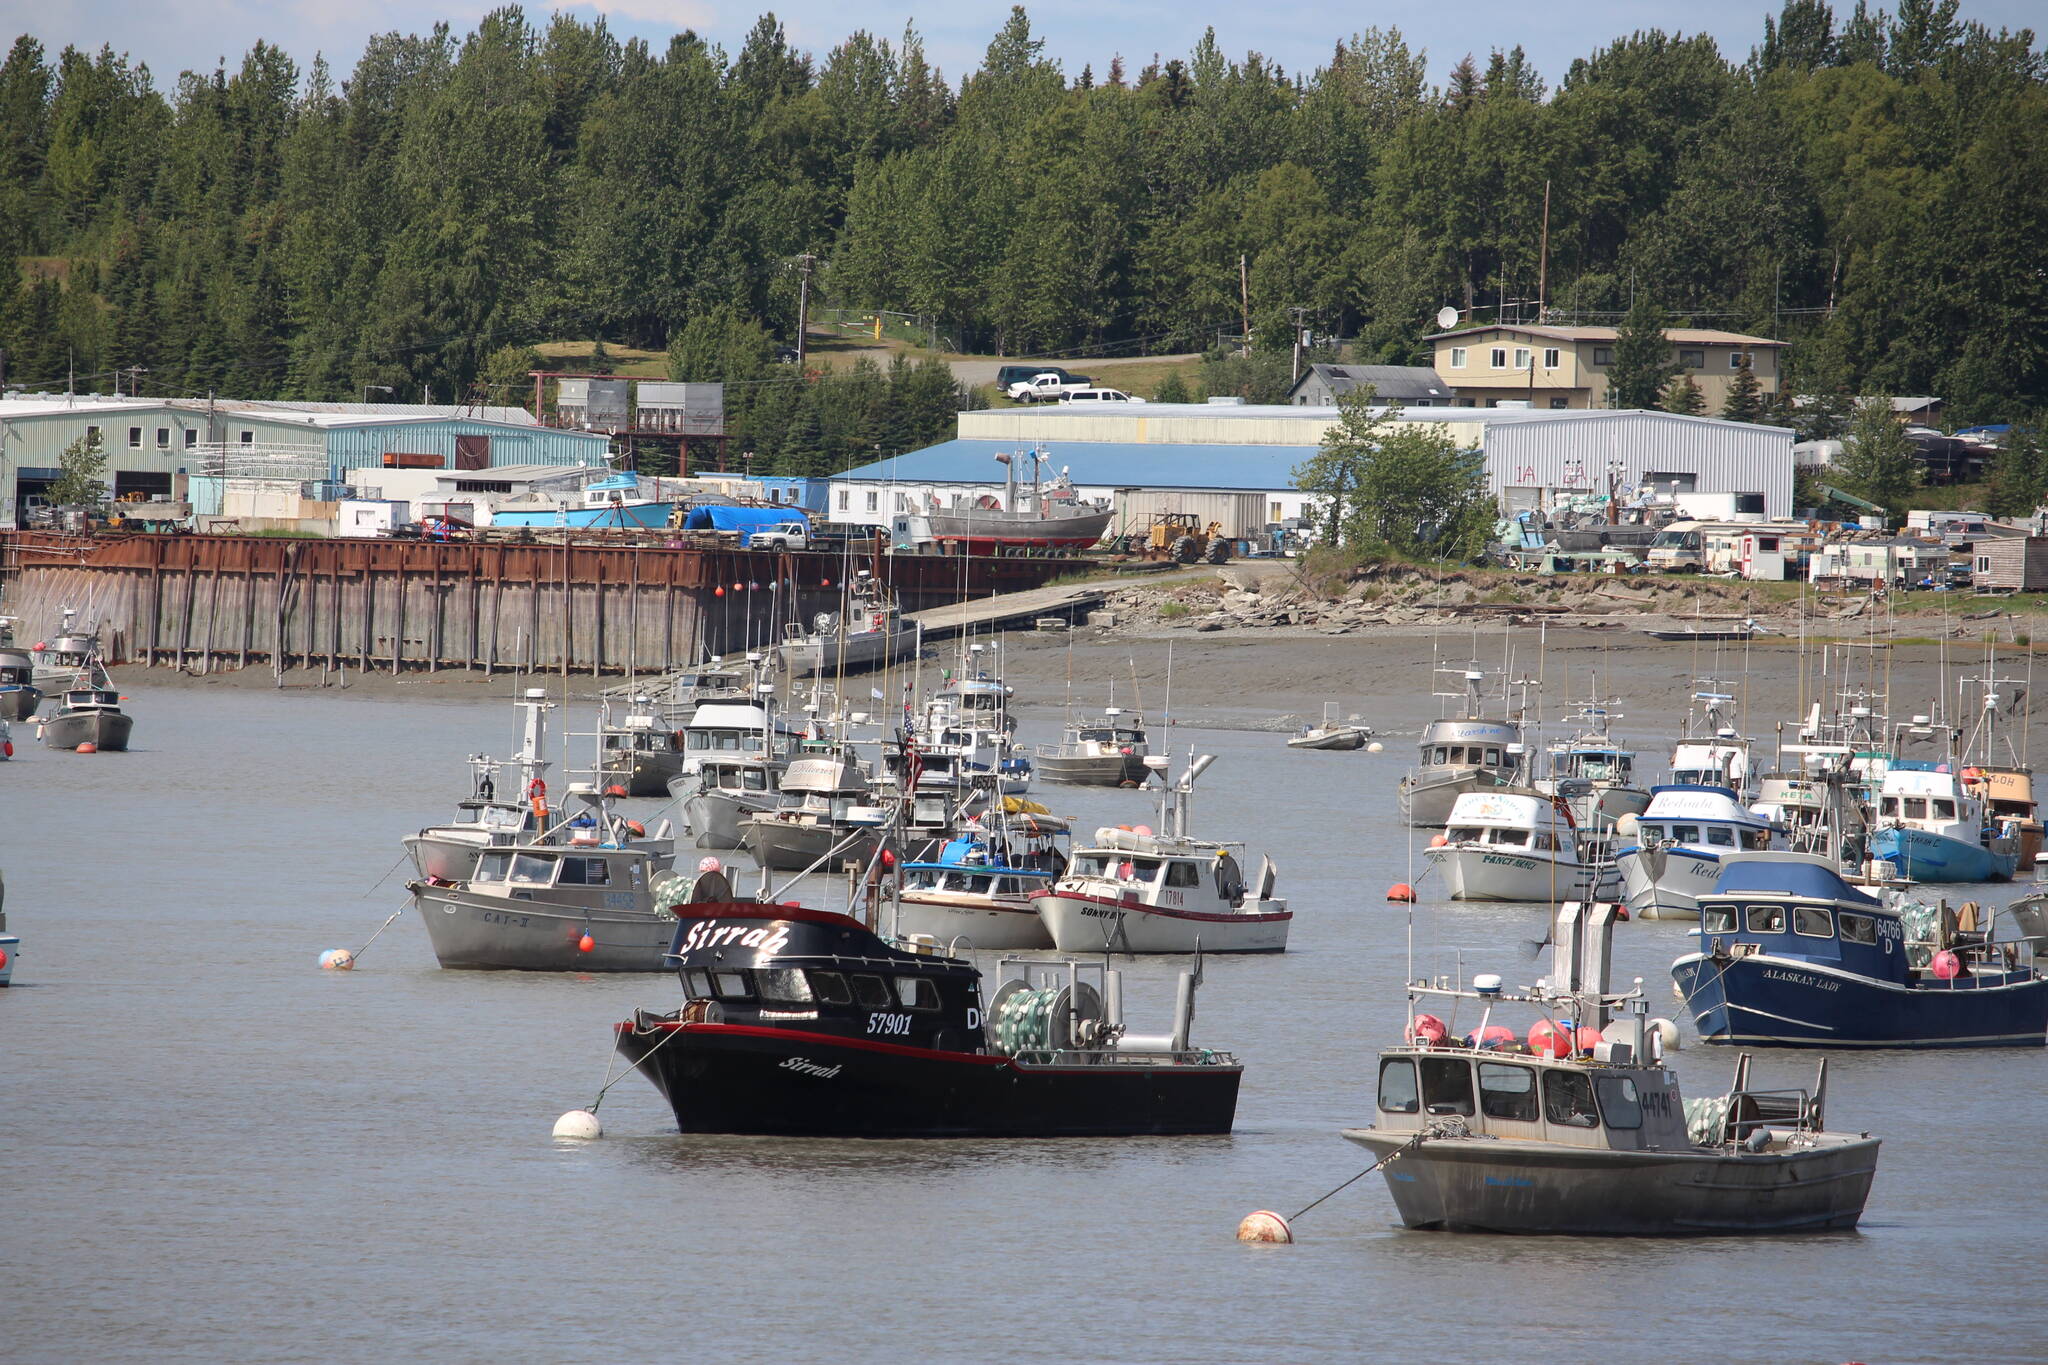 Commercial fishing vessels are seen here on the Kenai River on July 10, 2020. (Photo by Brian Mazurek/Peninsula Clarion)